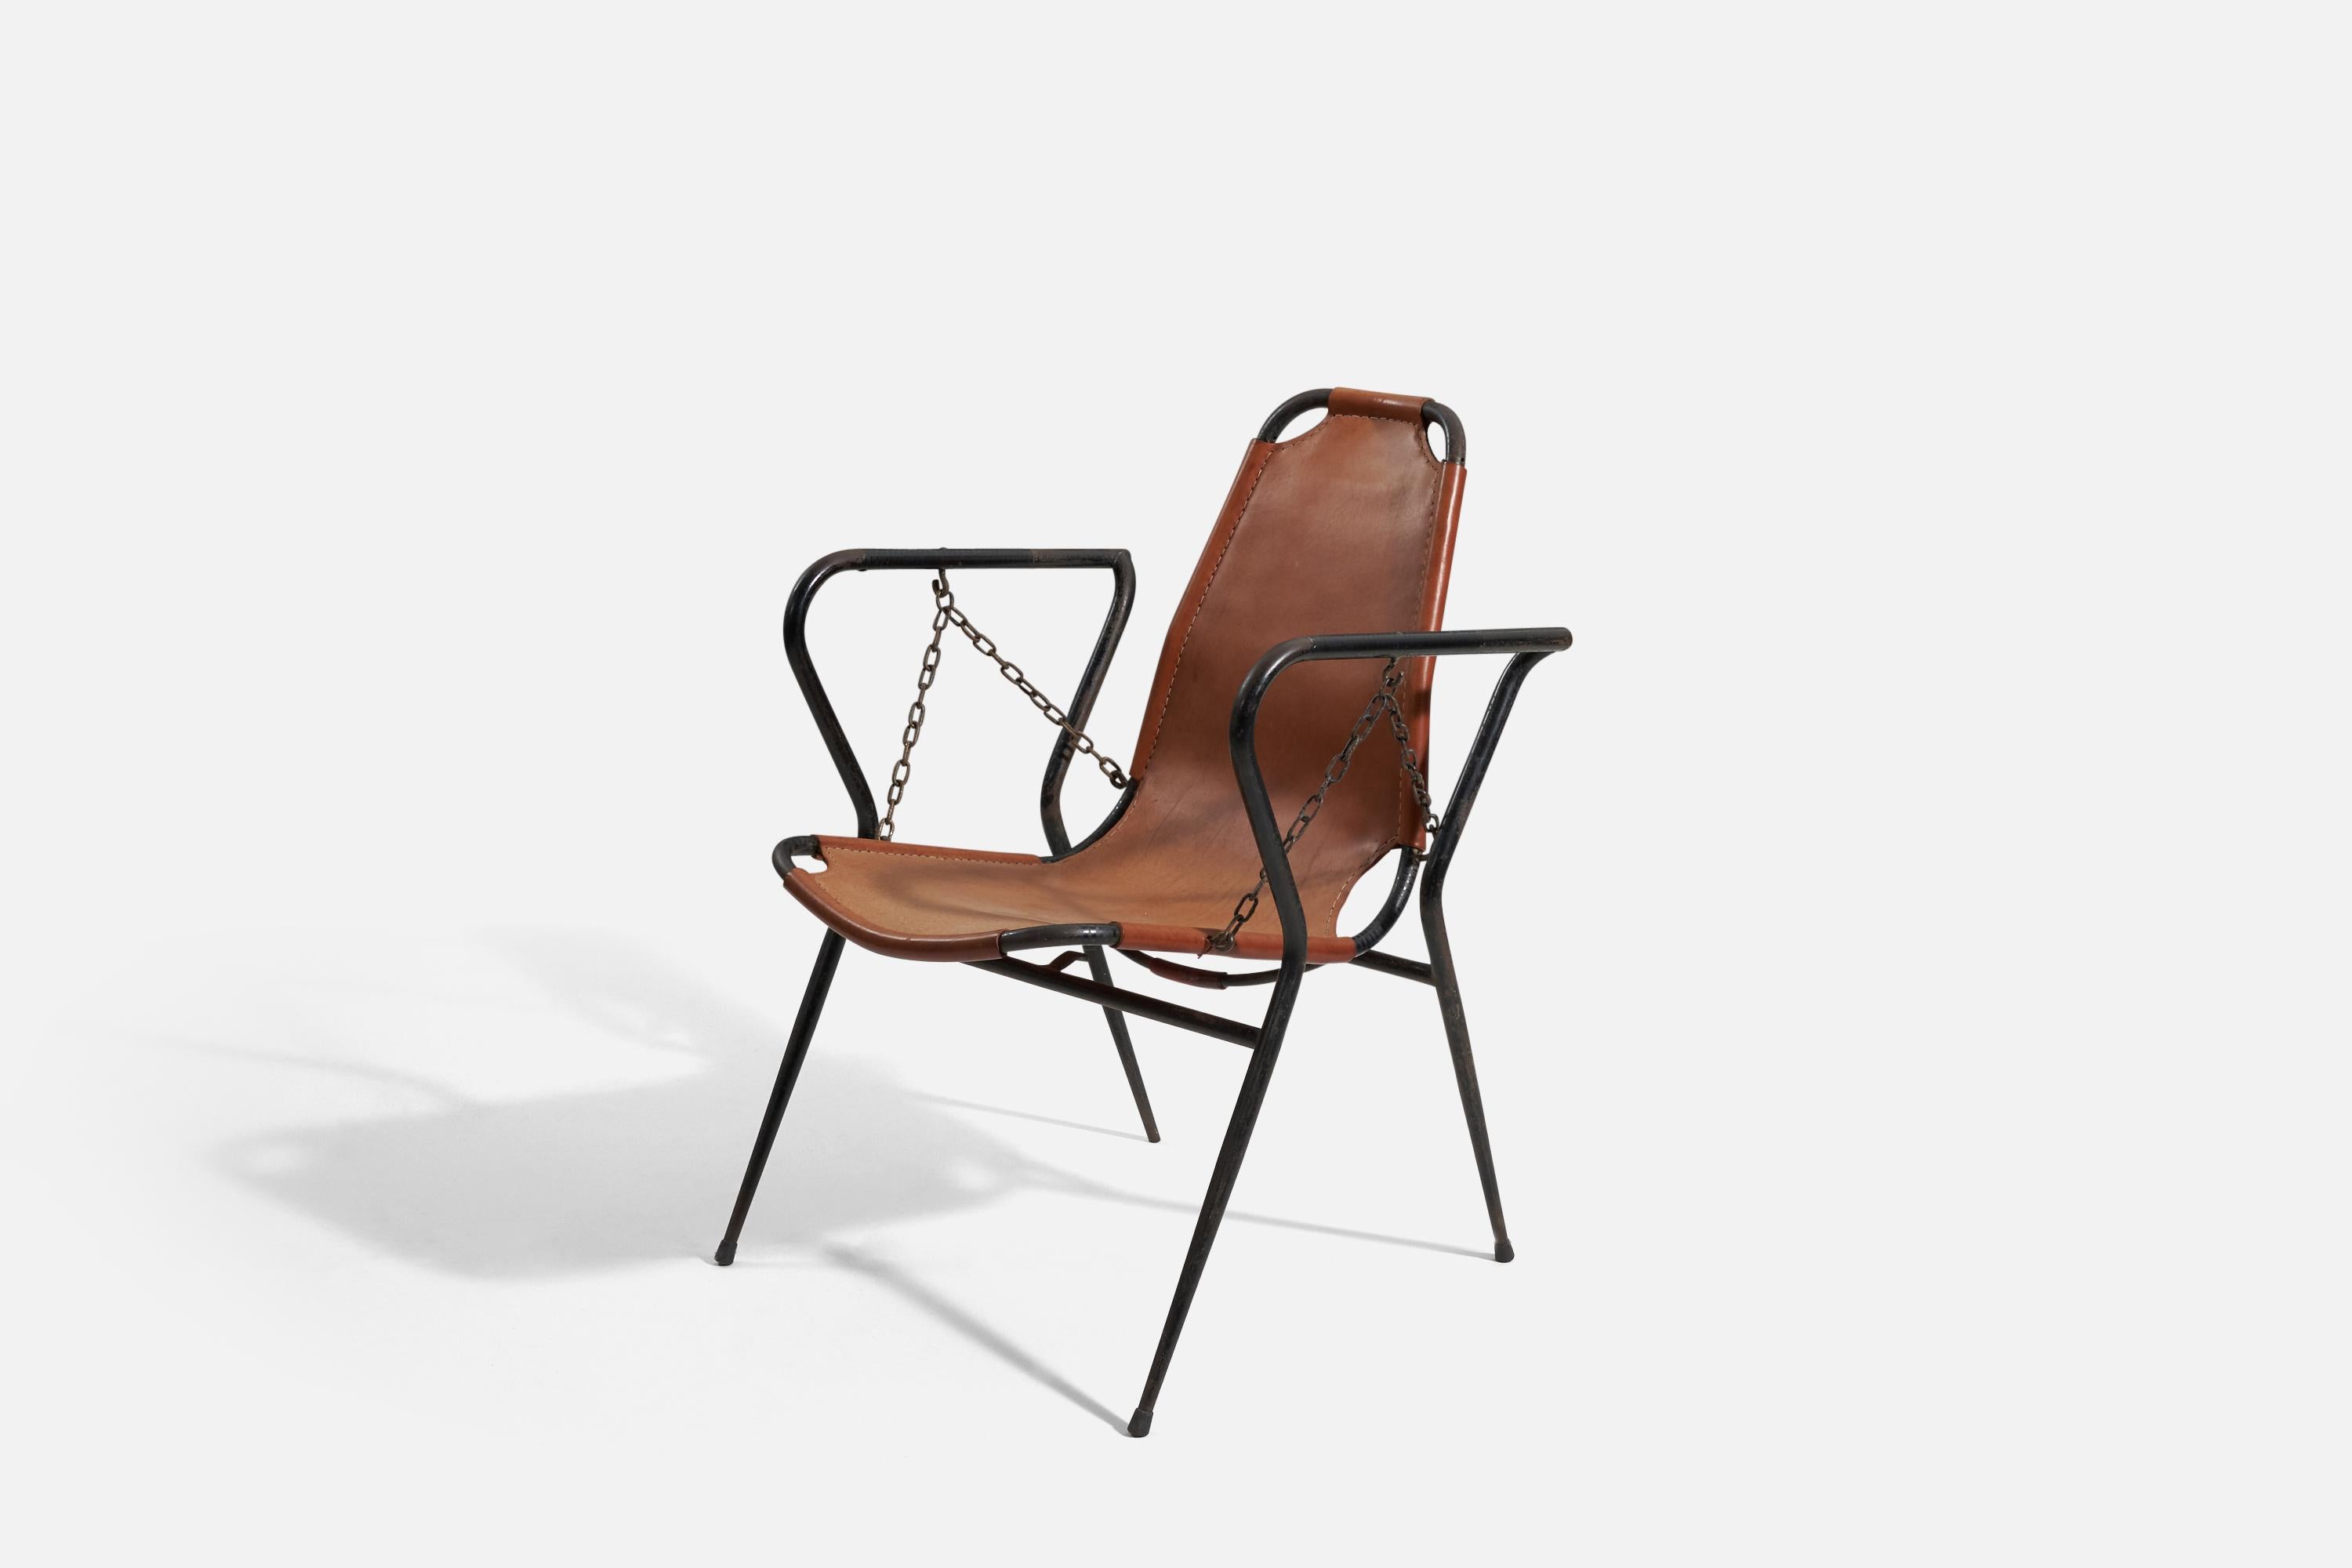 A metal and leather rocking chair, produced by an Italian designer, Italy, 1960s.